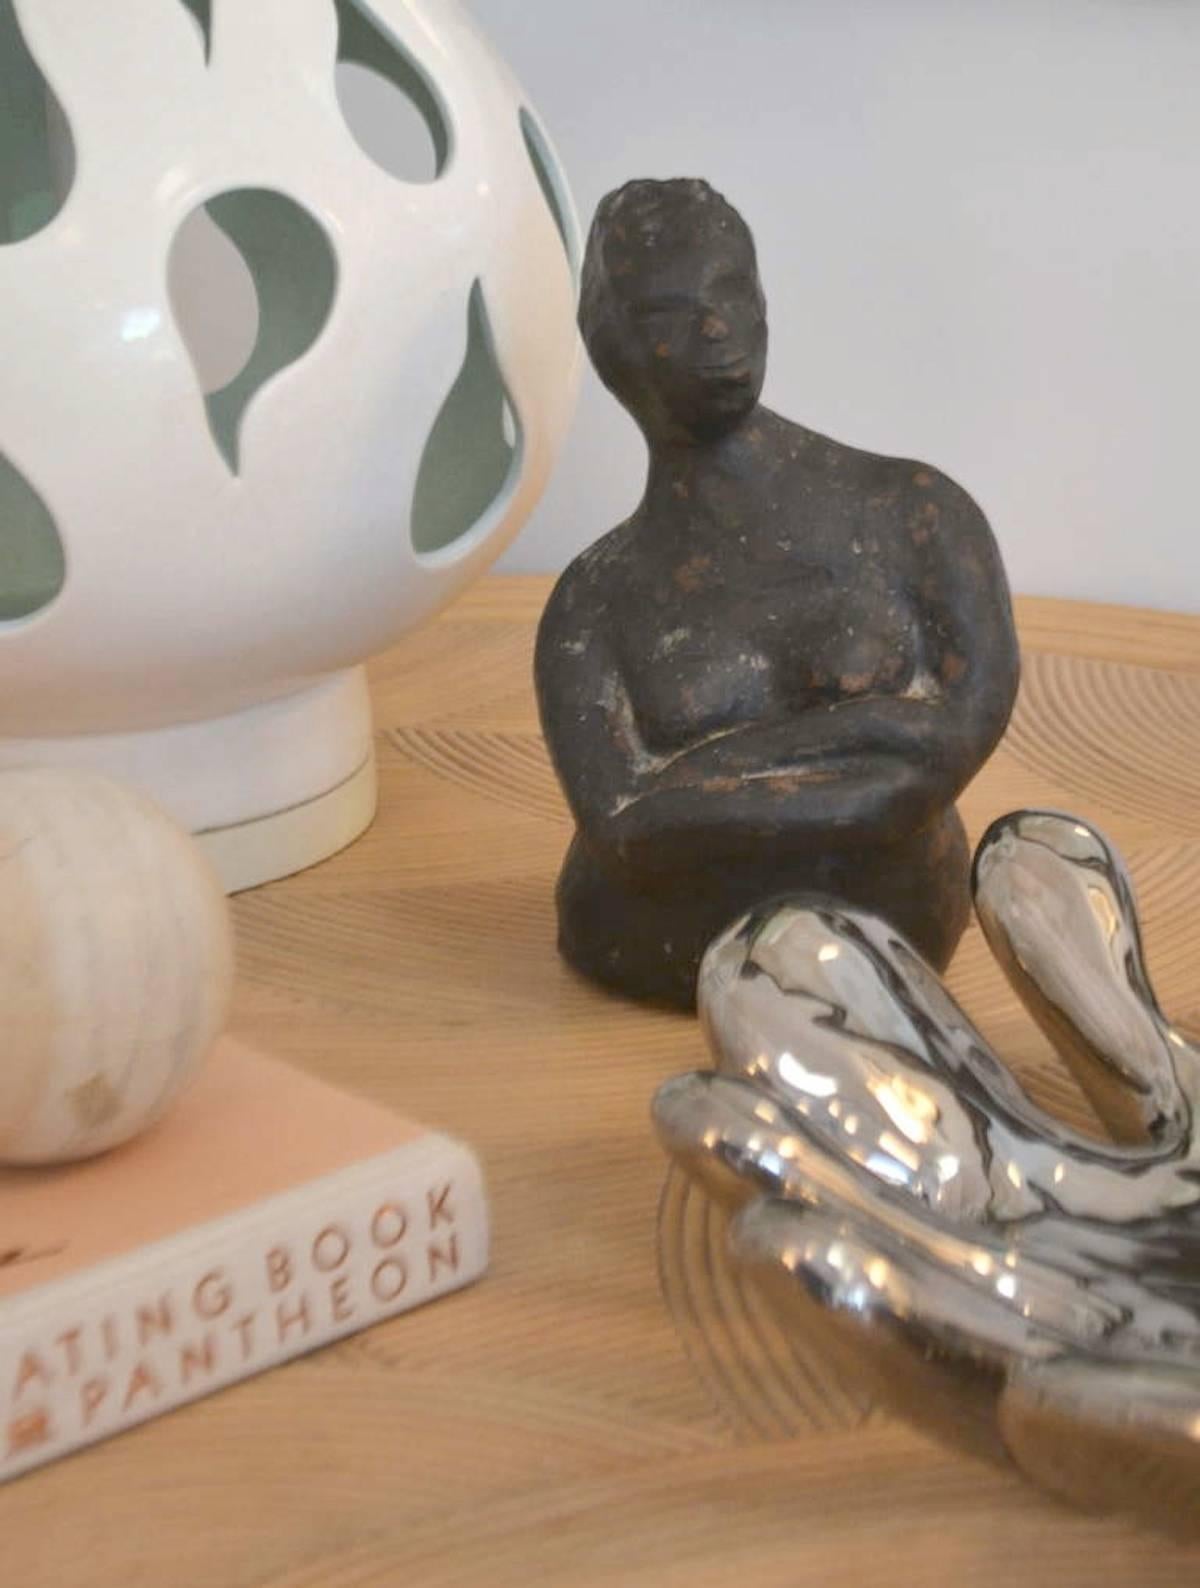 Striking hand thrown ceramic sculpture, circa 1950s-1960s. This midcentury sculpture of a female figure is organic in form with a subtle volcanic glaze.